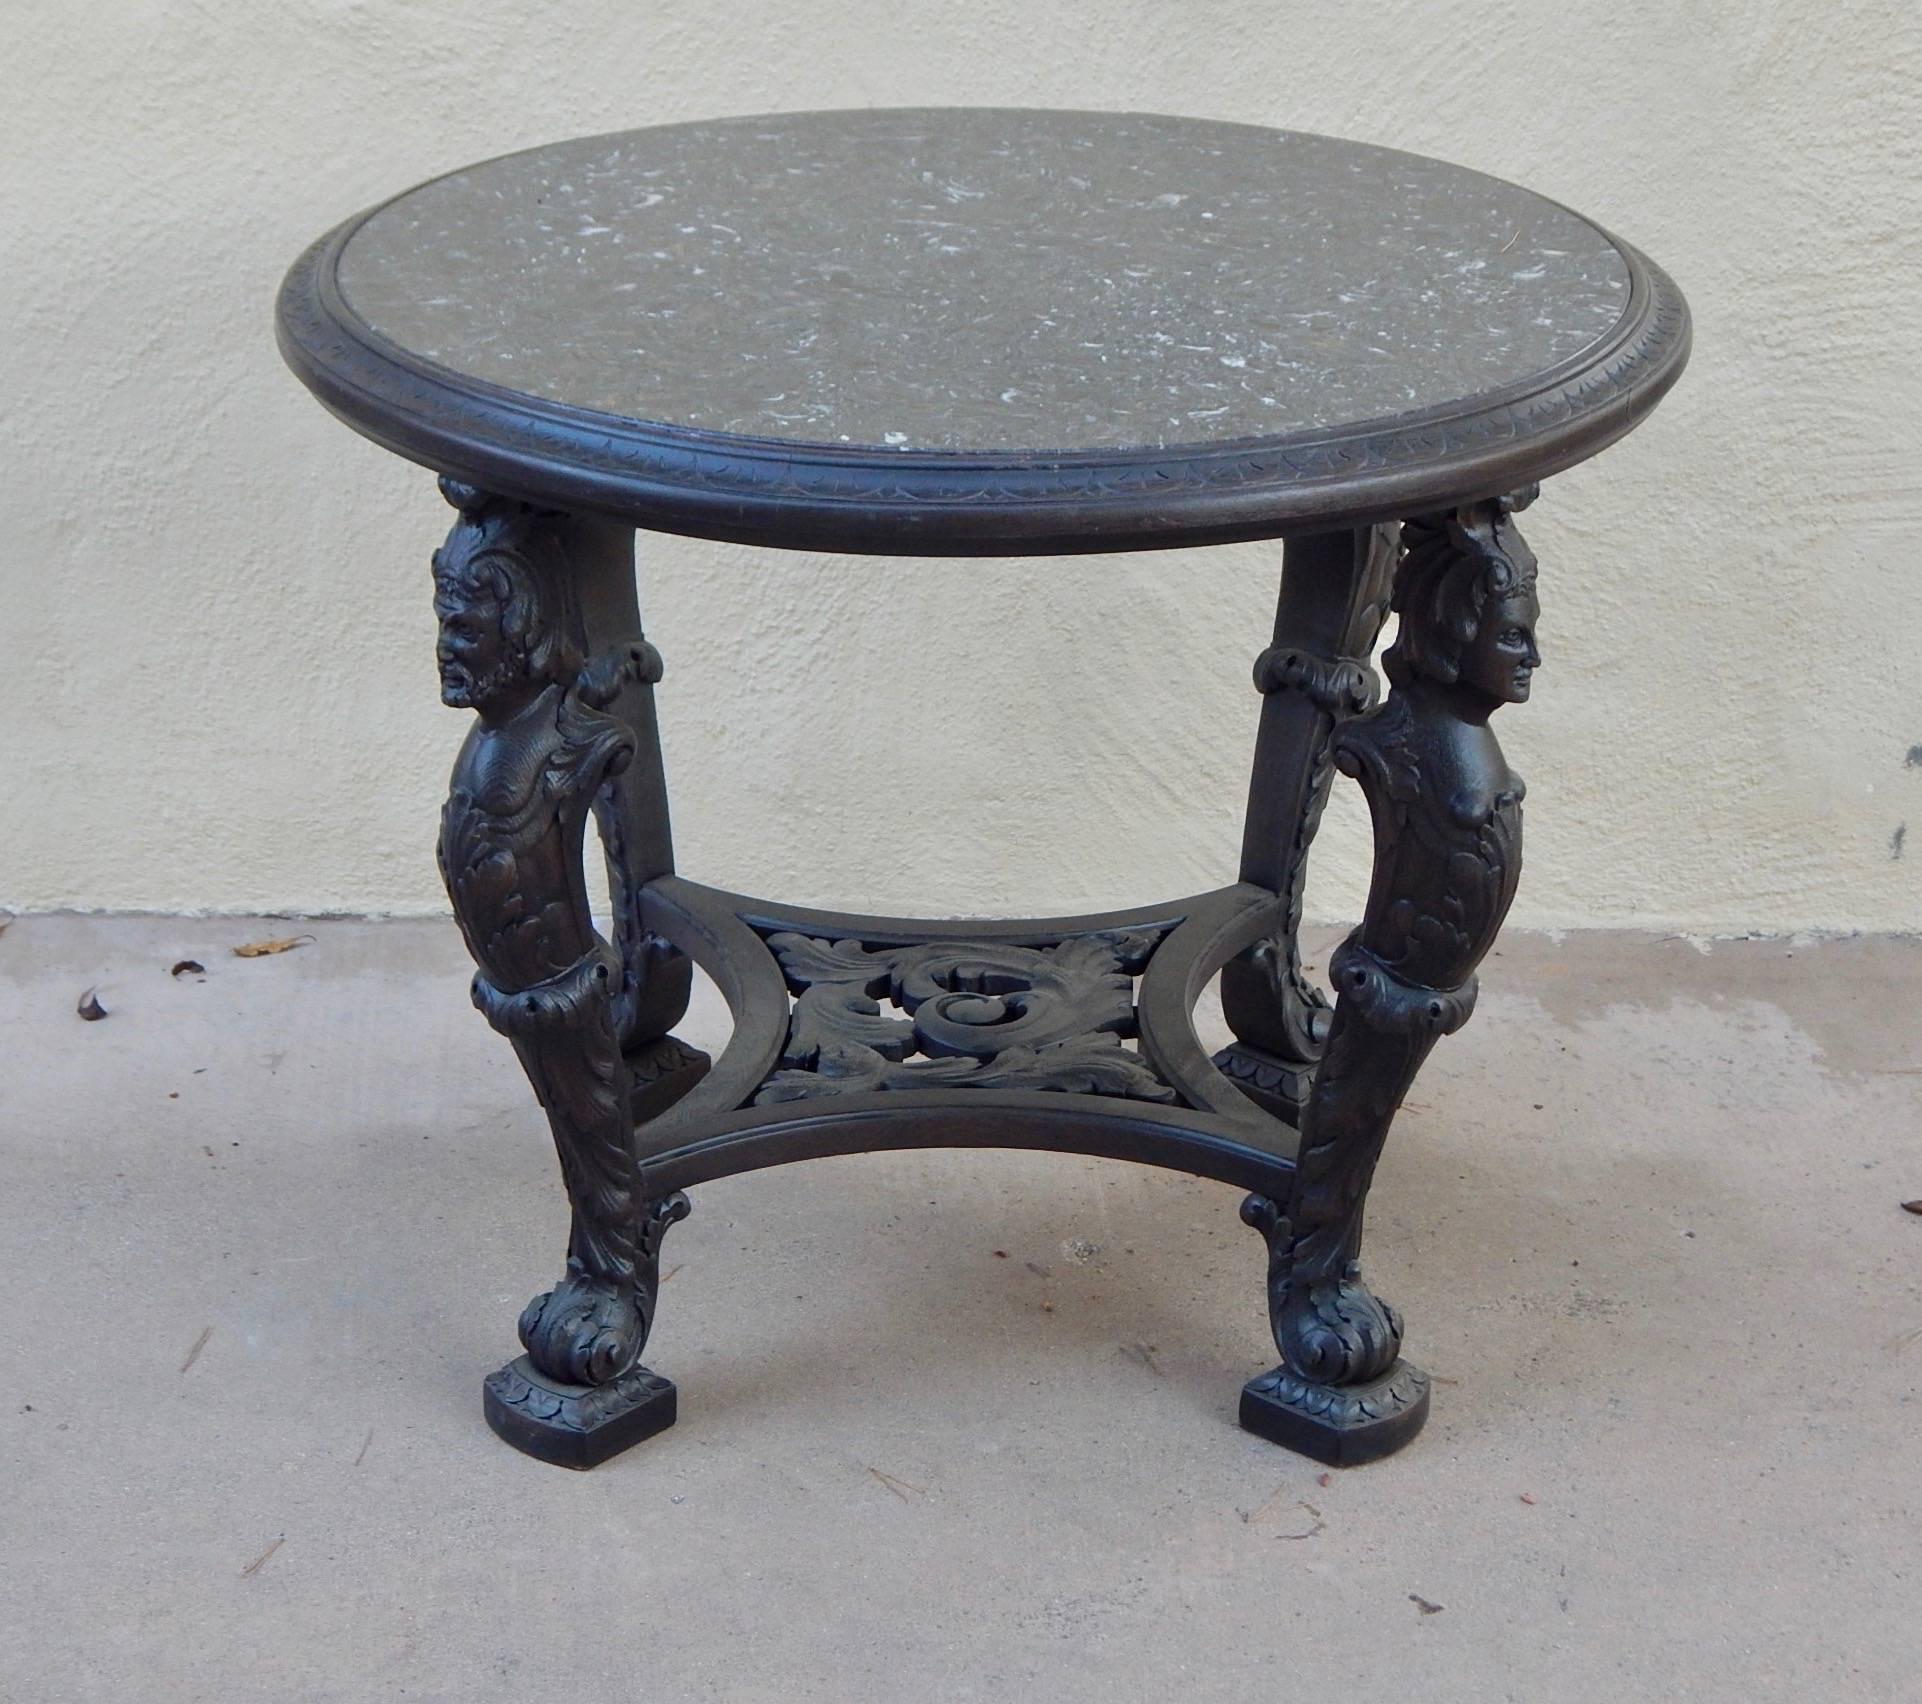 Early 20th Century Swedish Gothic Revival Table with Figural Columns and Stone Top, circa 1920 For Sale